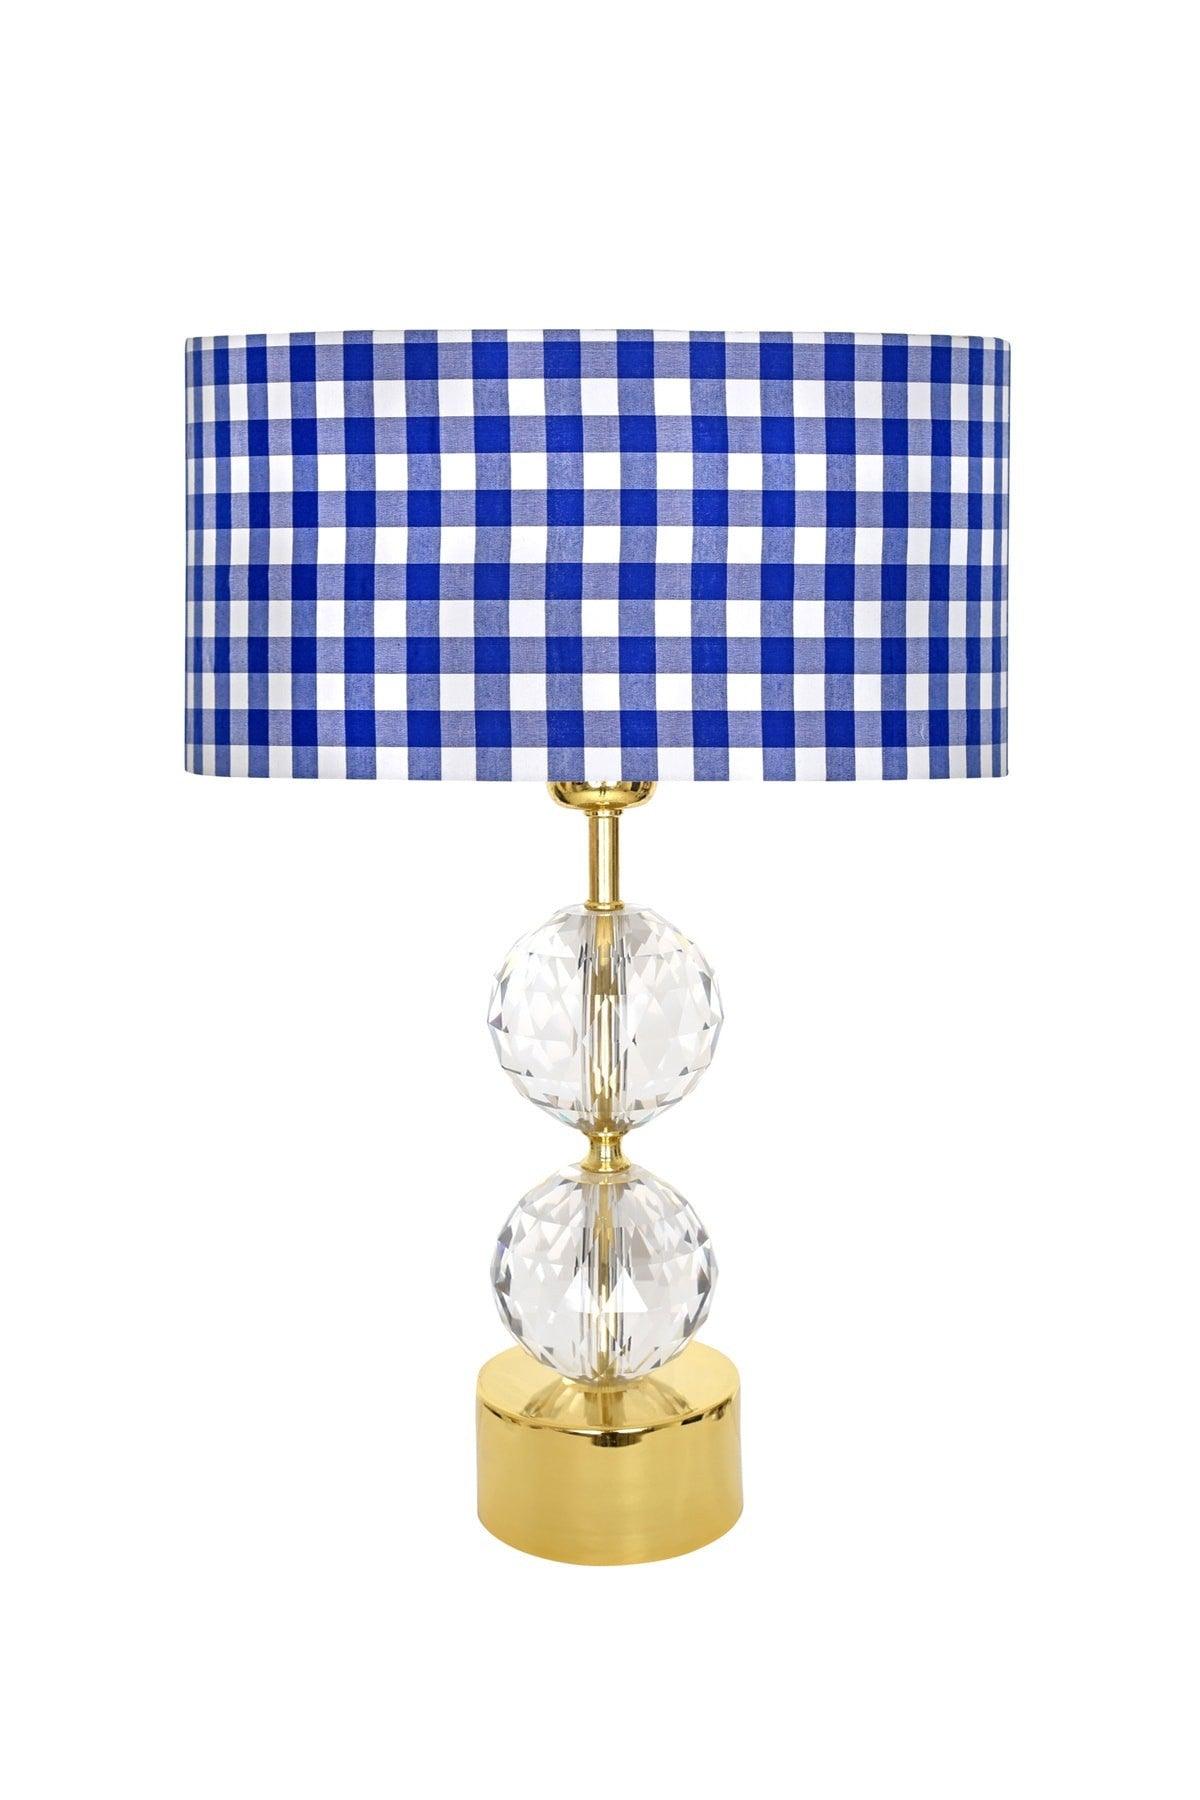 Gld-krs01 Gold Footed Crystal Lampshade - Blue Plaid - Swordslife